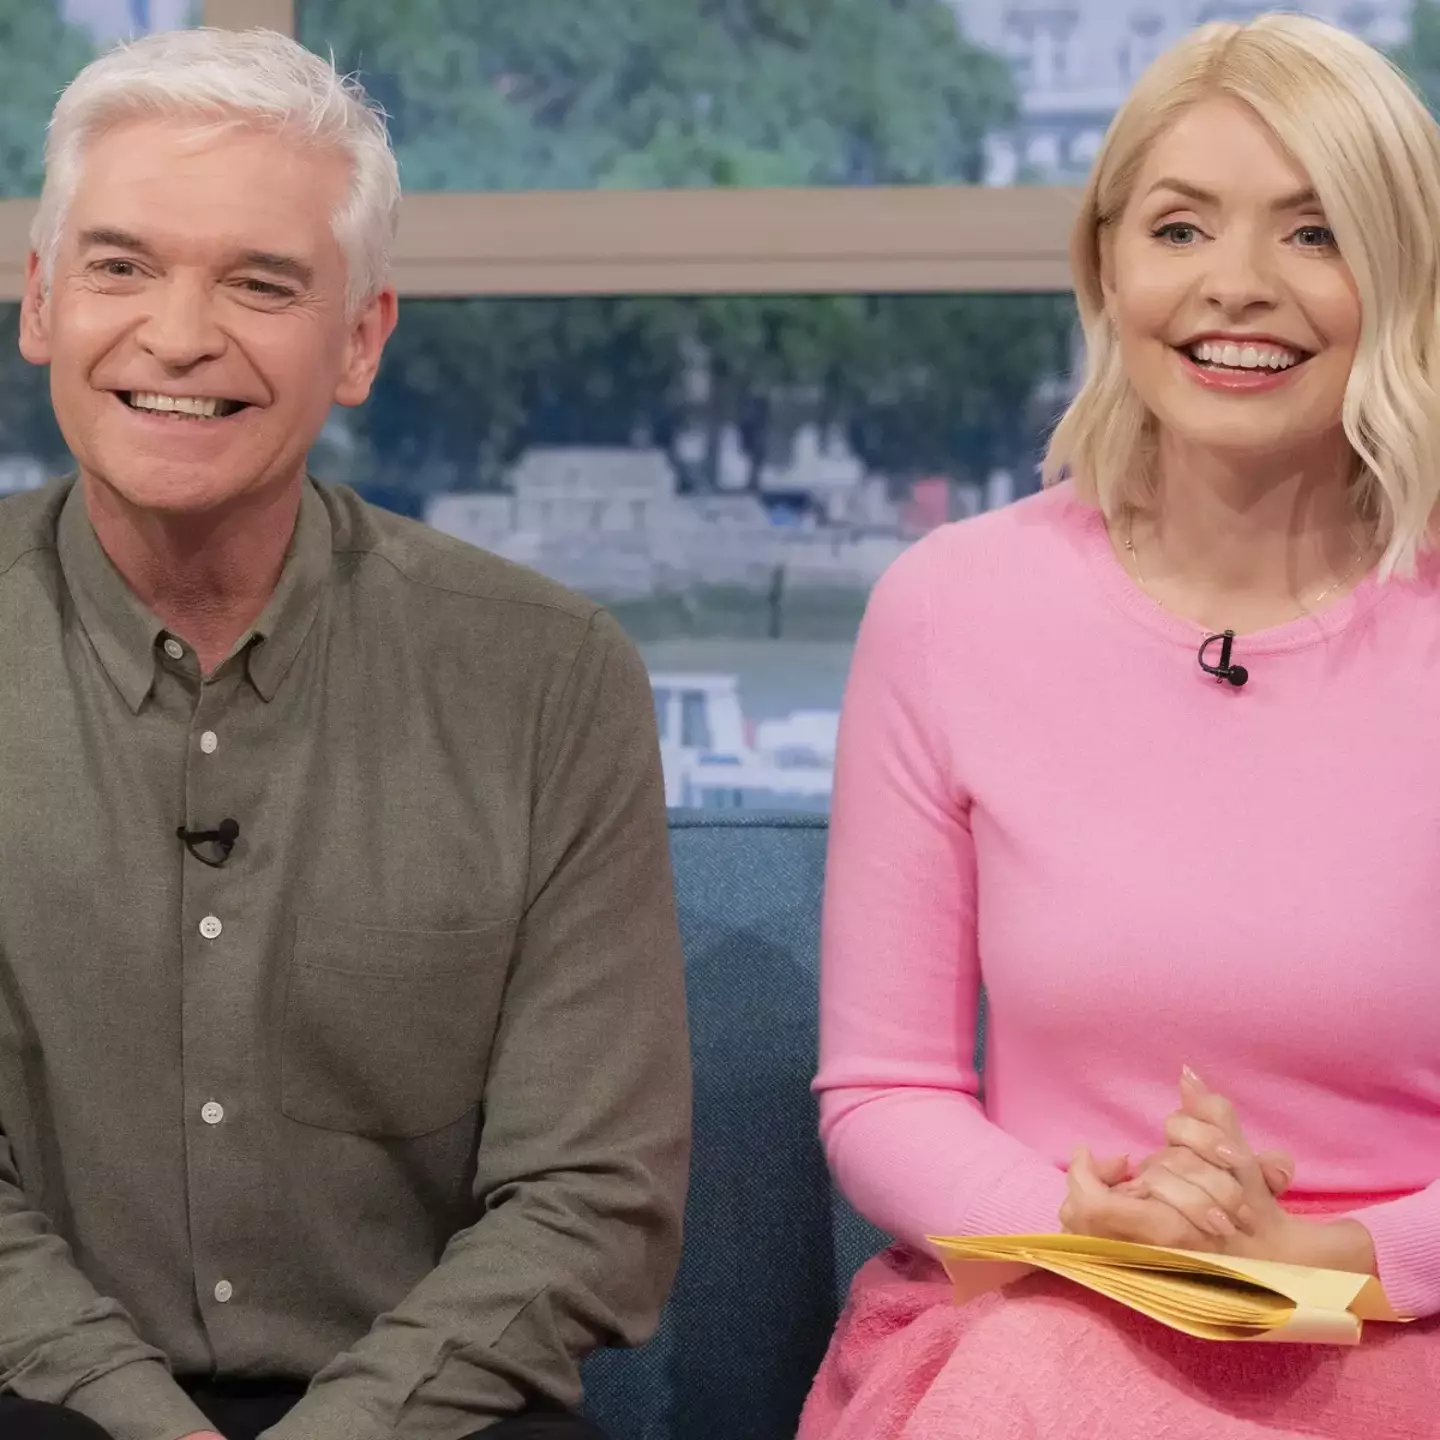 Holly's exit from the show comes months after former co-host Phillip Schofield's own departure.